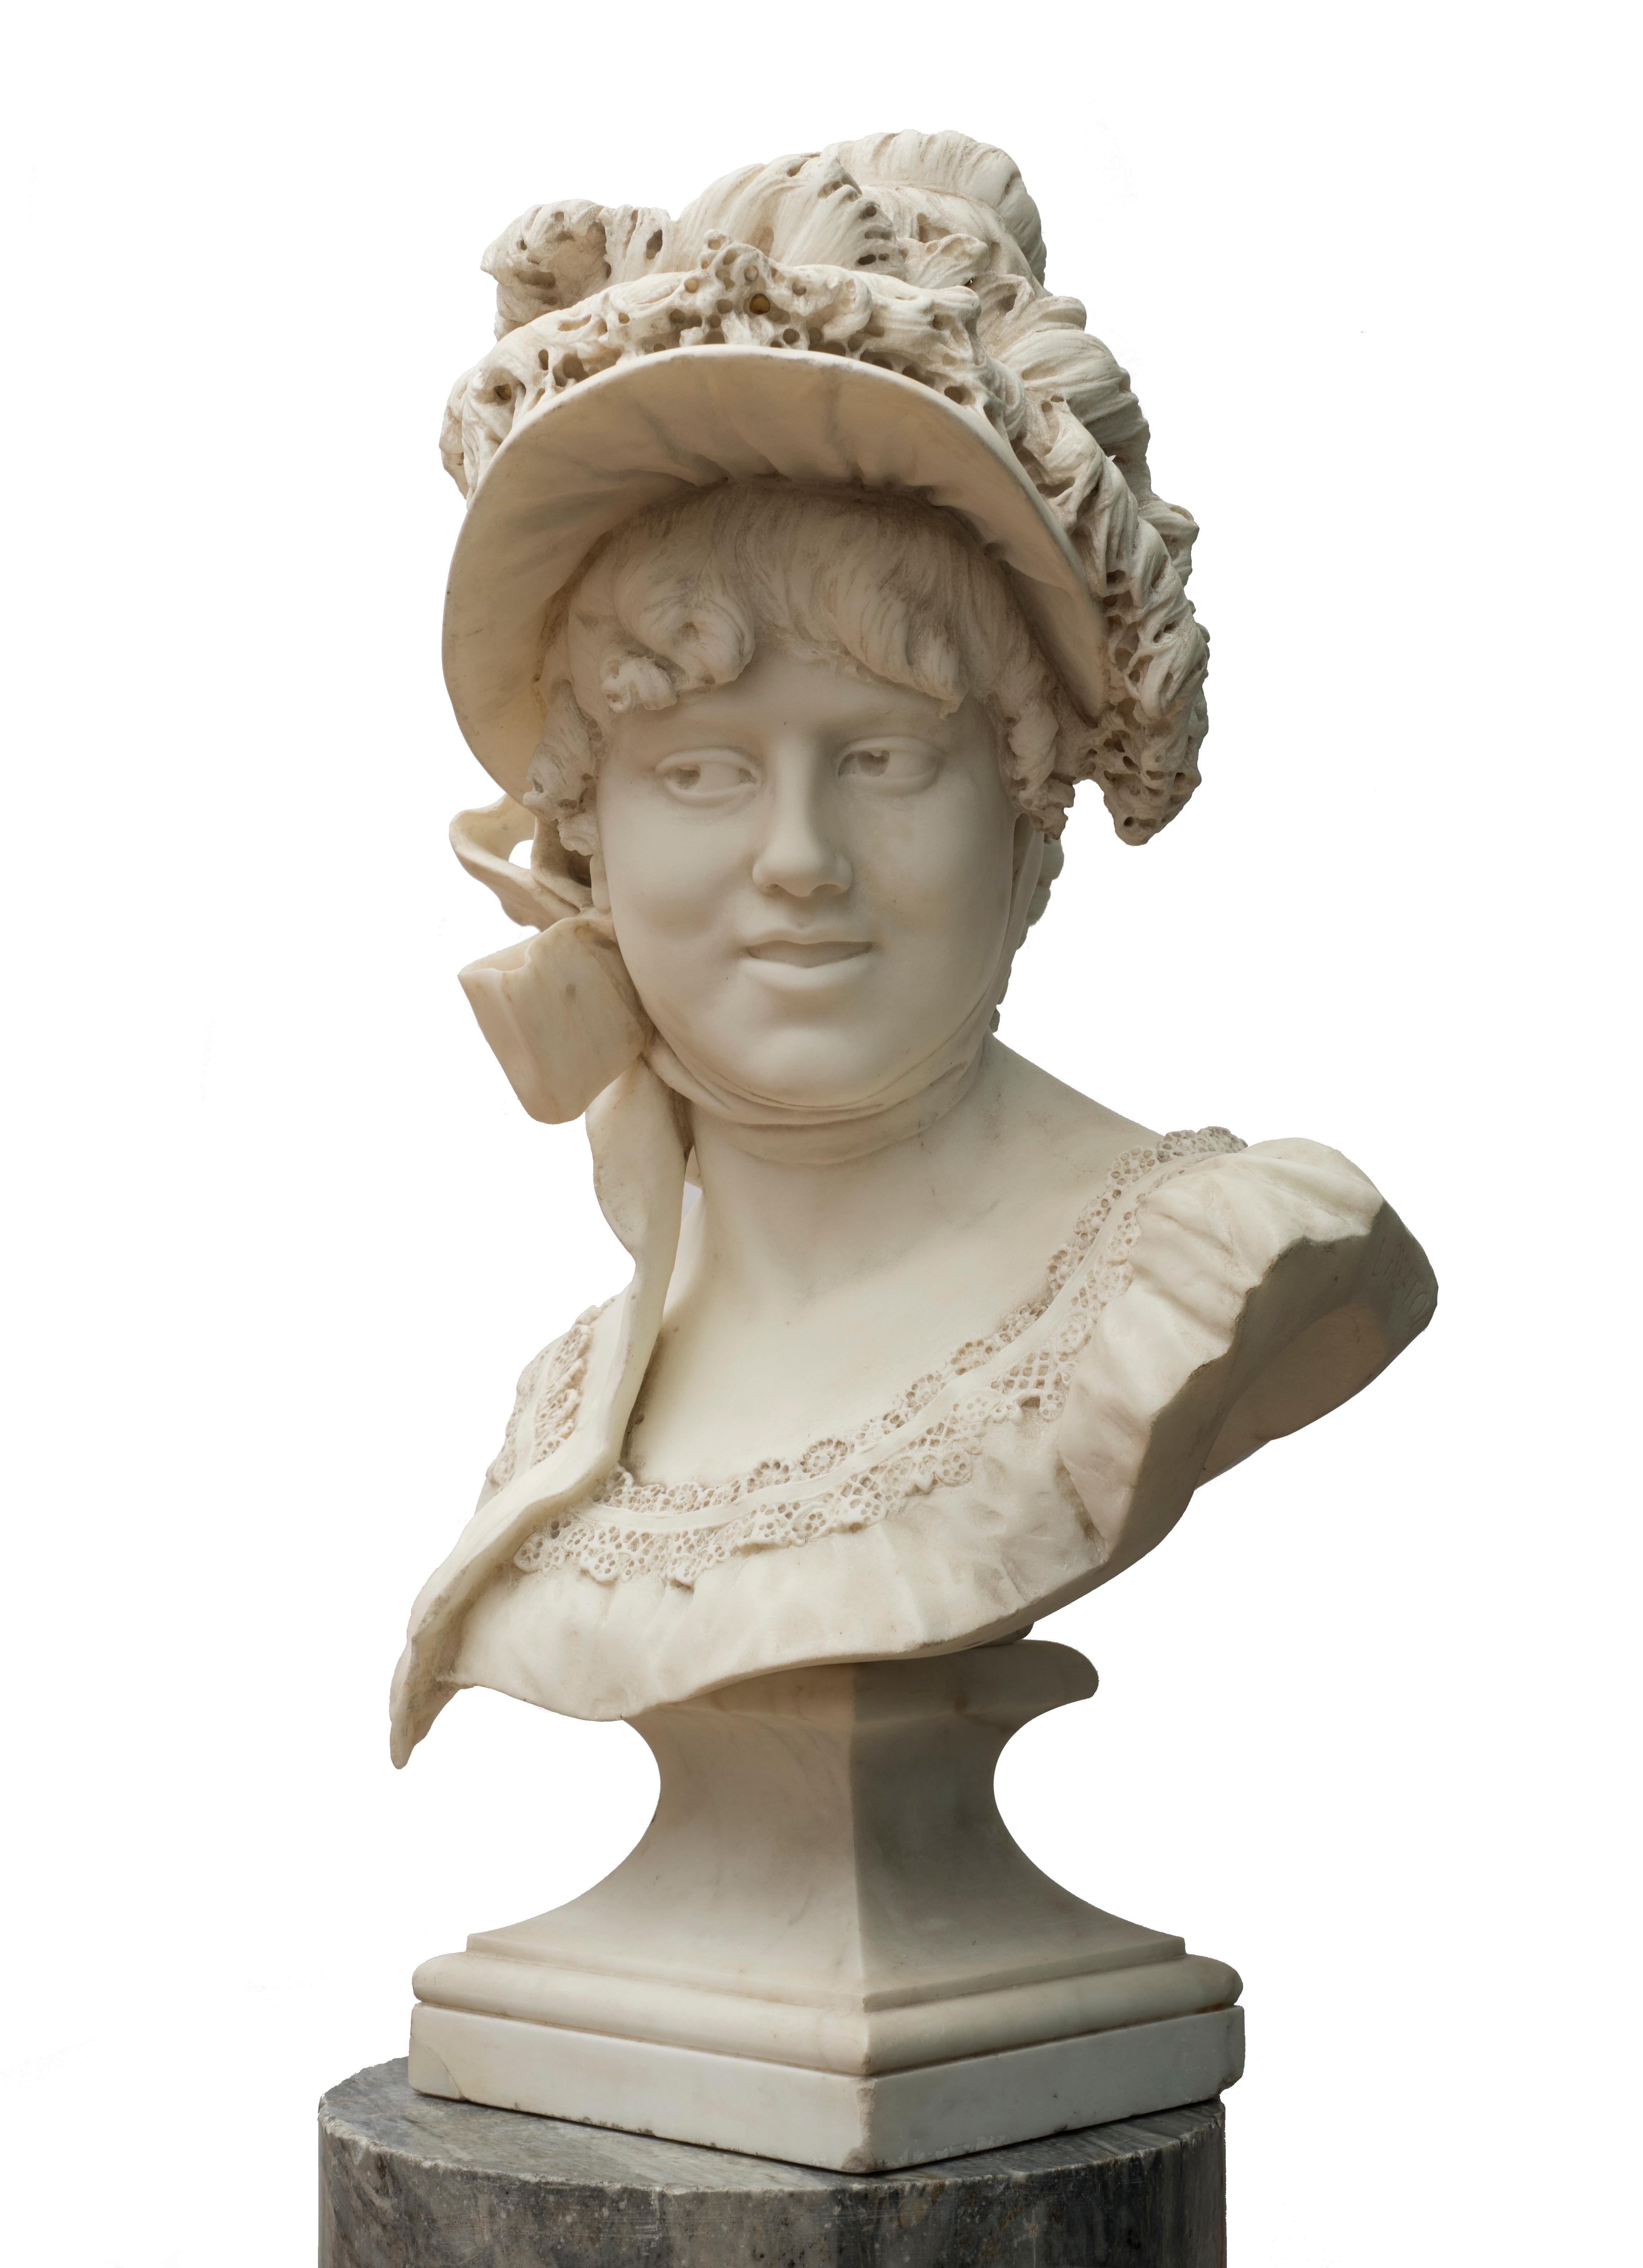 Maiden with hat - Sculpture by Luigi Preatoni